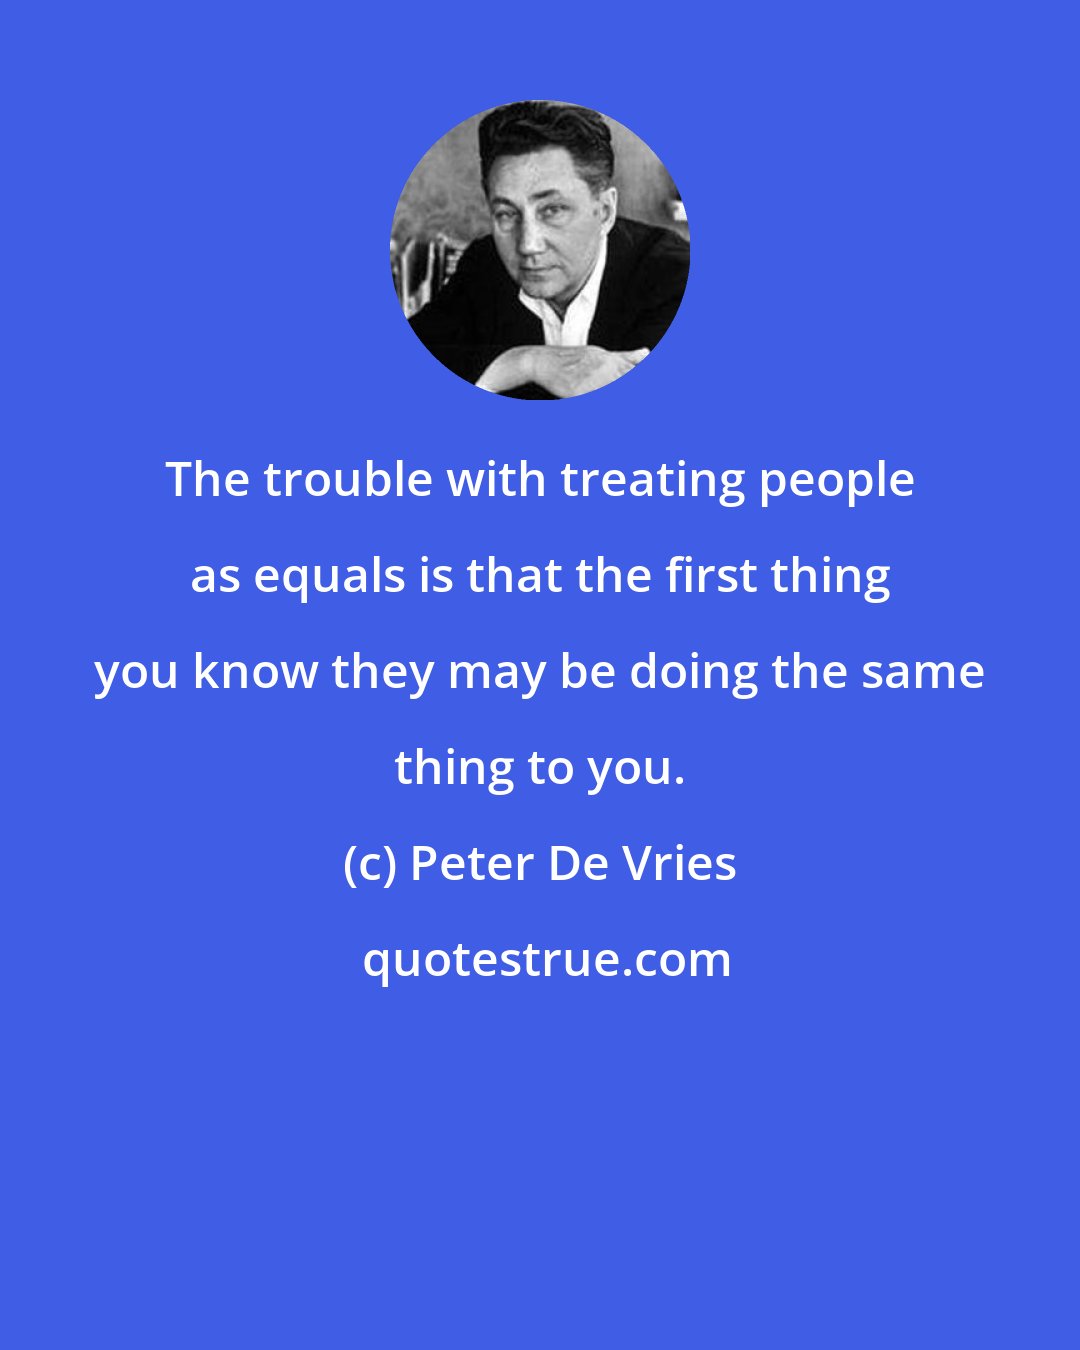 Peter De Vries: The trouble with treating people as equals is that the first thing you know they may be doing the same thing to you.